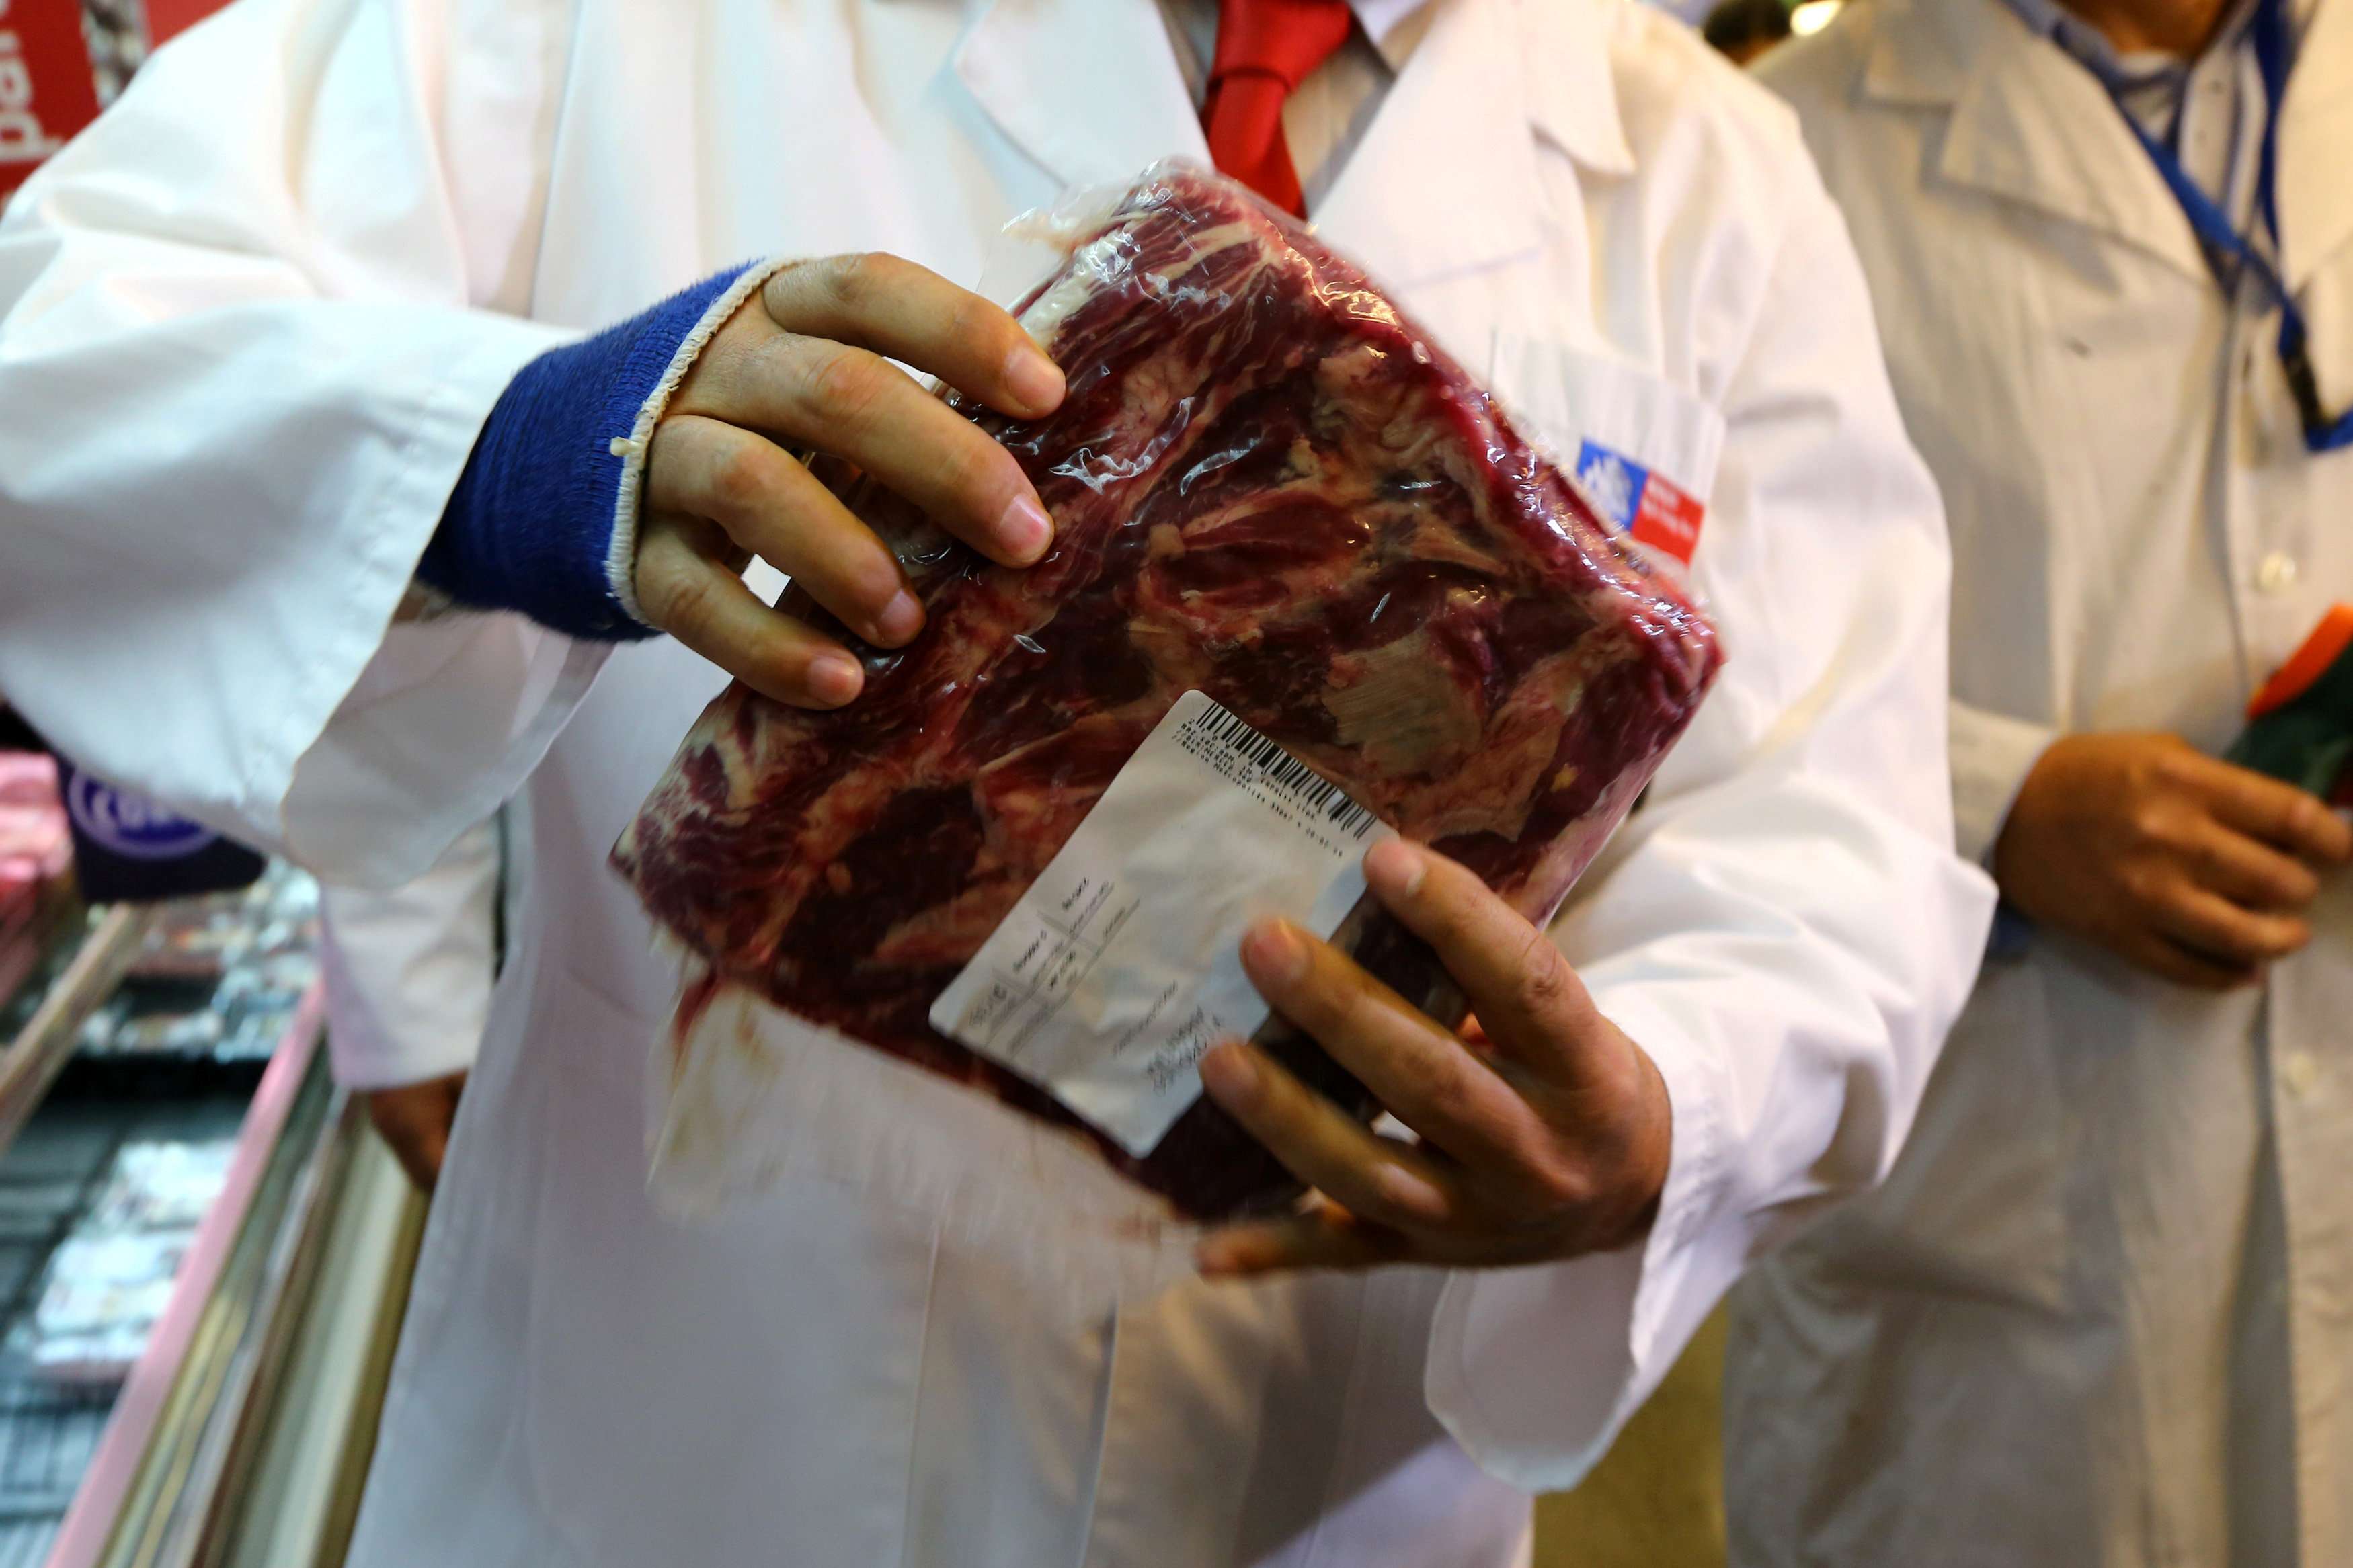 A member of the Chile’s Public Health Surveillance Agency inspects a piece of beef. Photo: Reuters